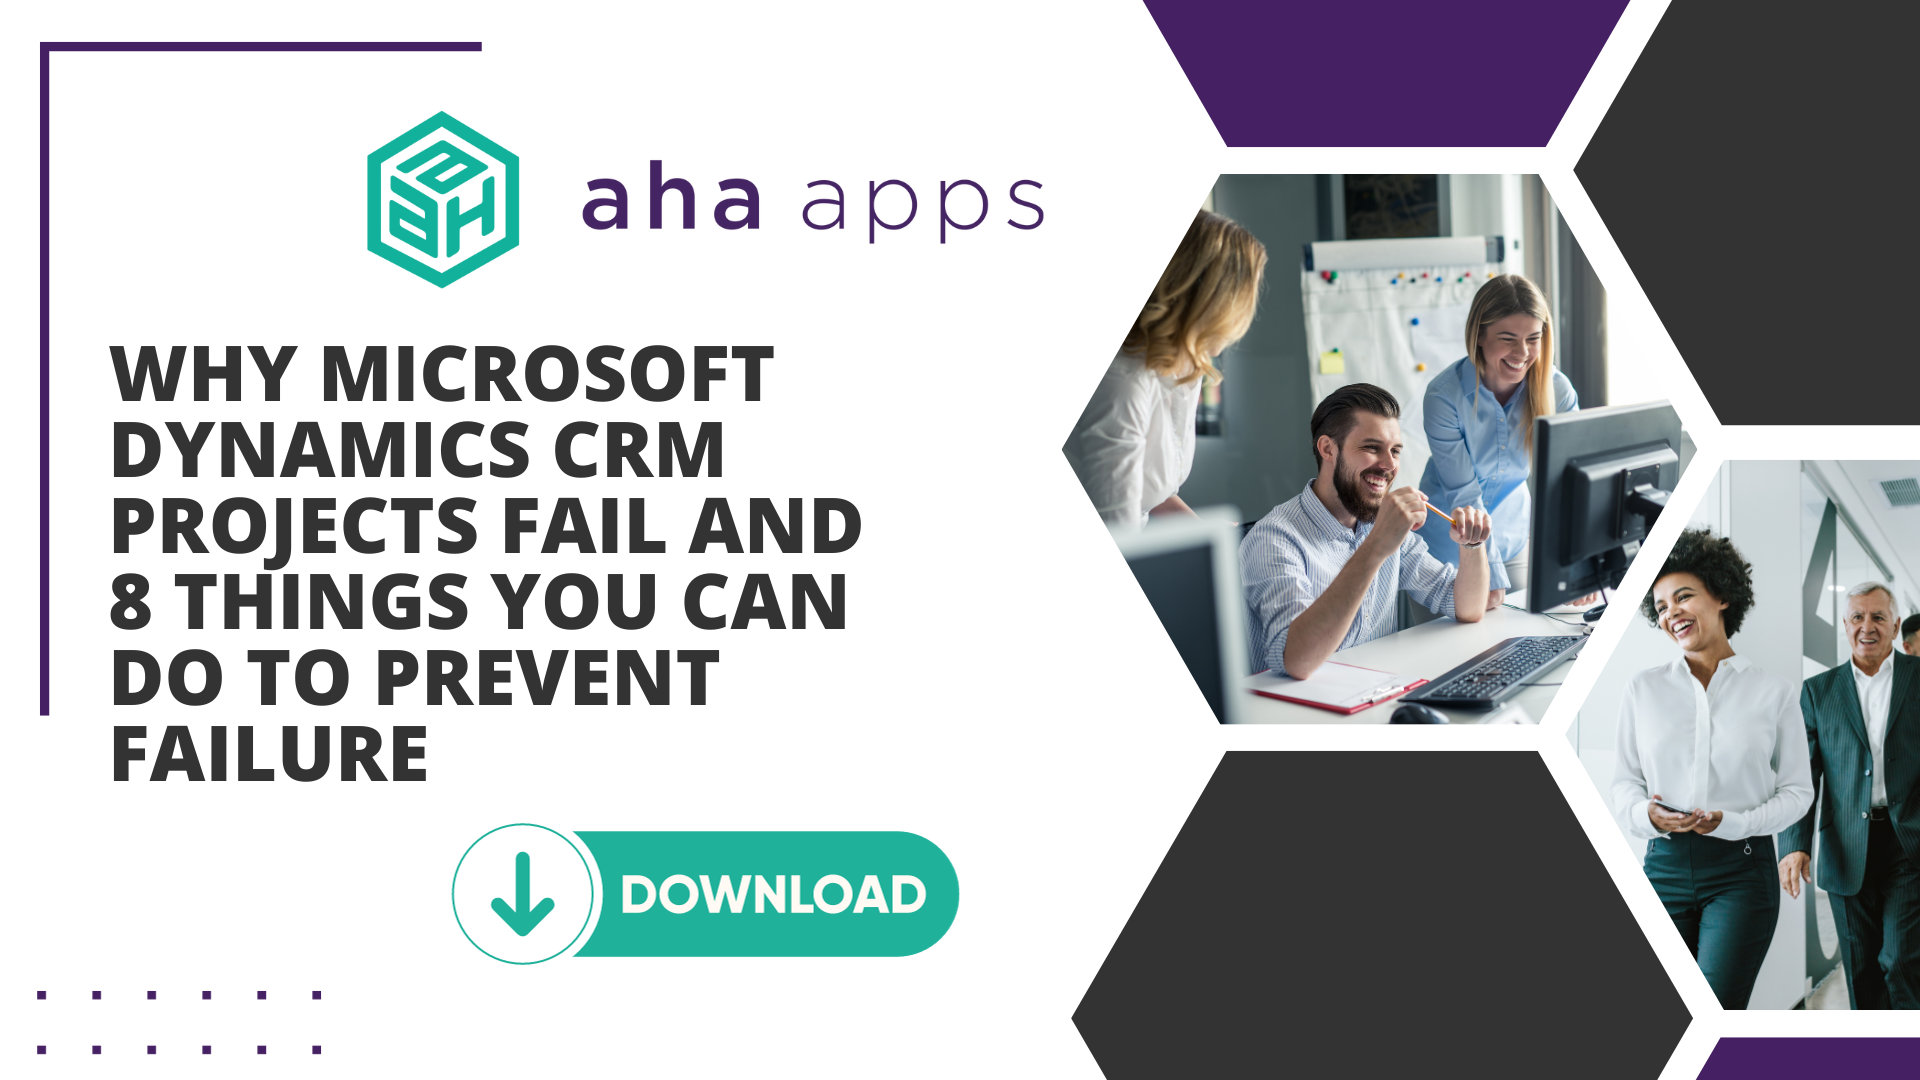 Why Microsoft Dynamics CRM Projects Fail and 8 Things You Can Do to Prevent Failure - Aha Apps